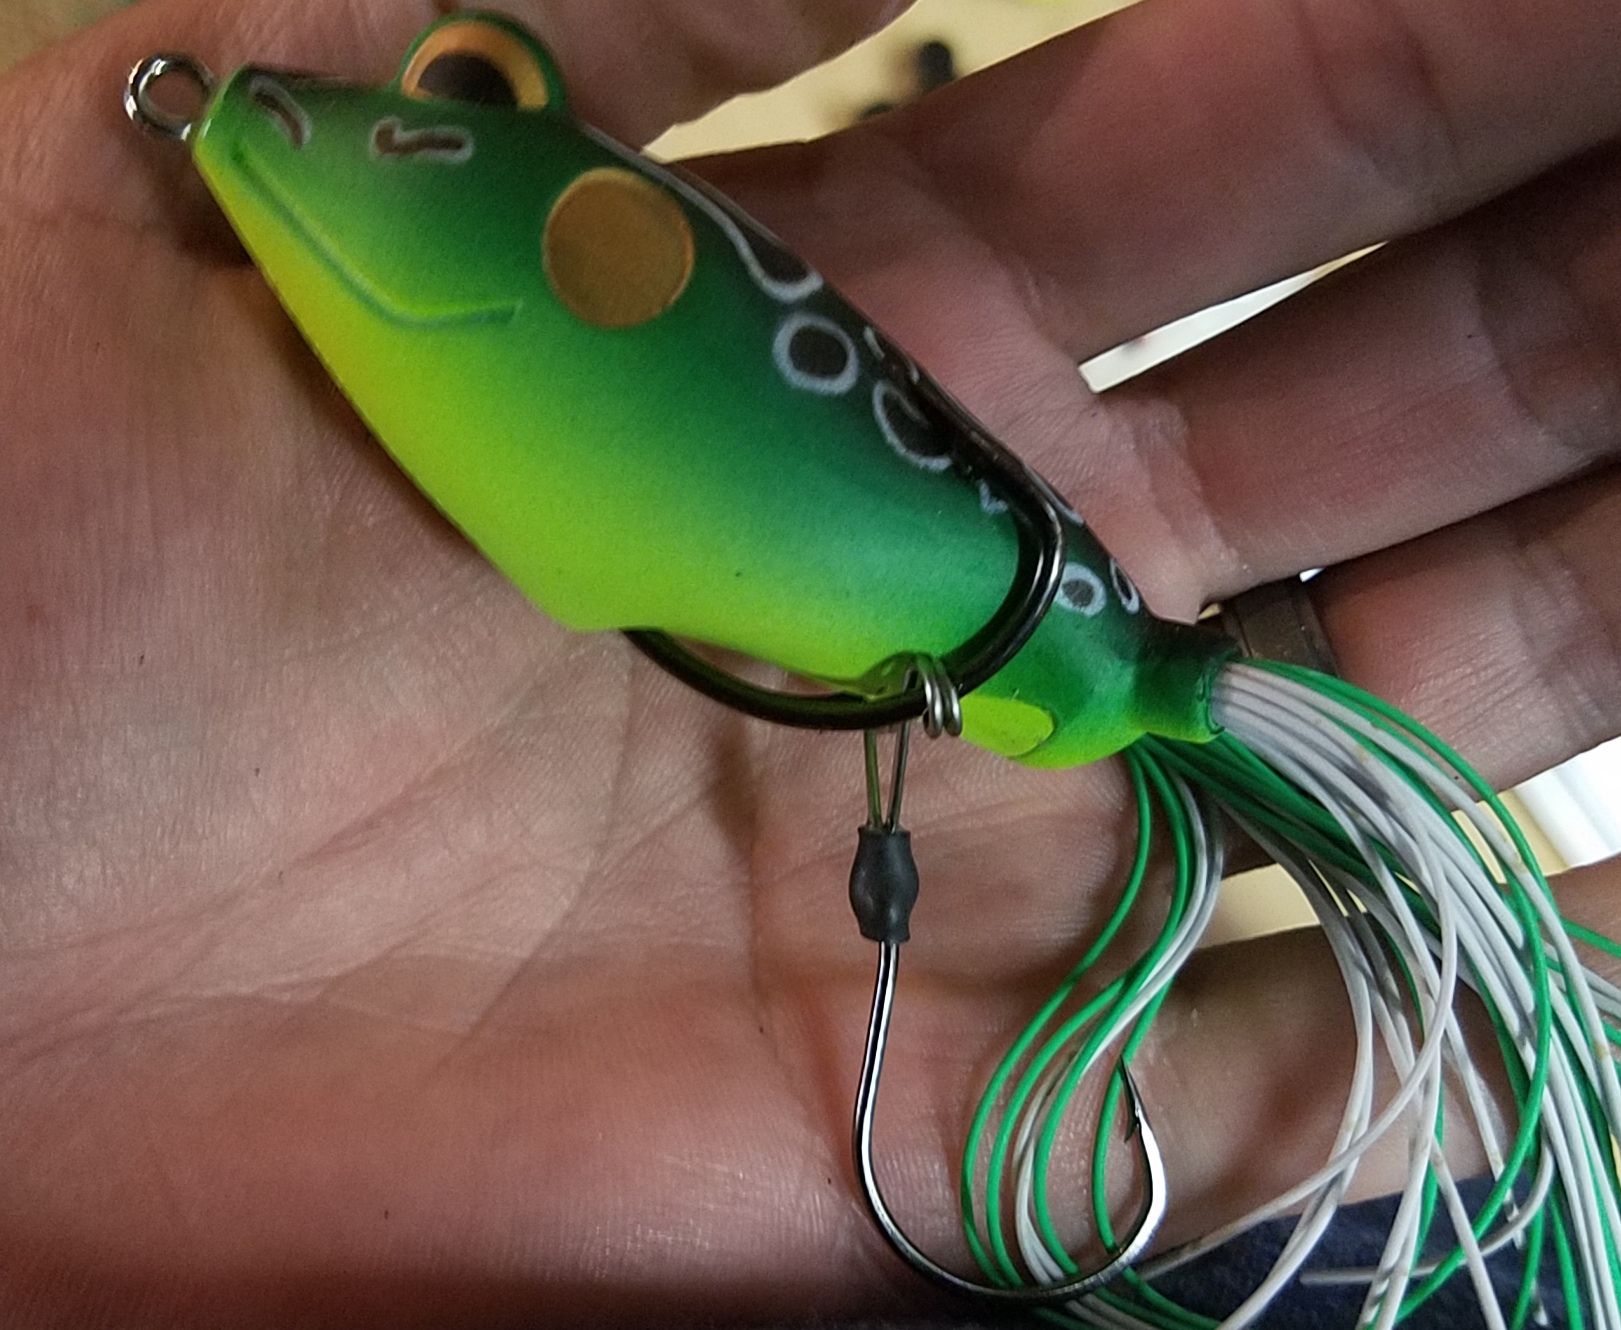 may use frog lures for fishing effectively. In Fathera.com you can get frog lures in different colors, shapes, etc.